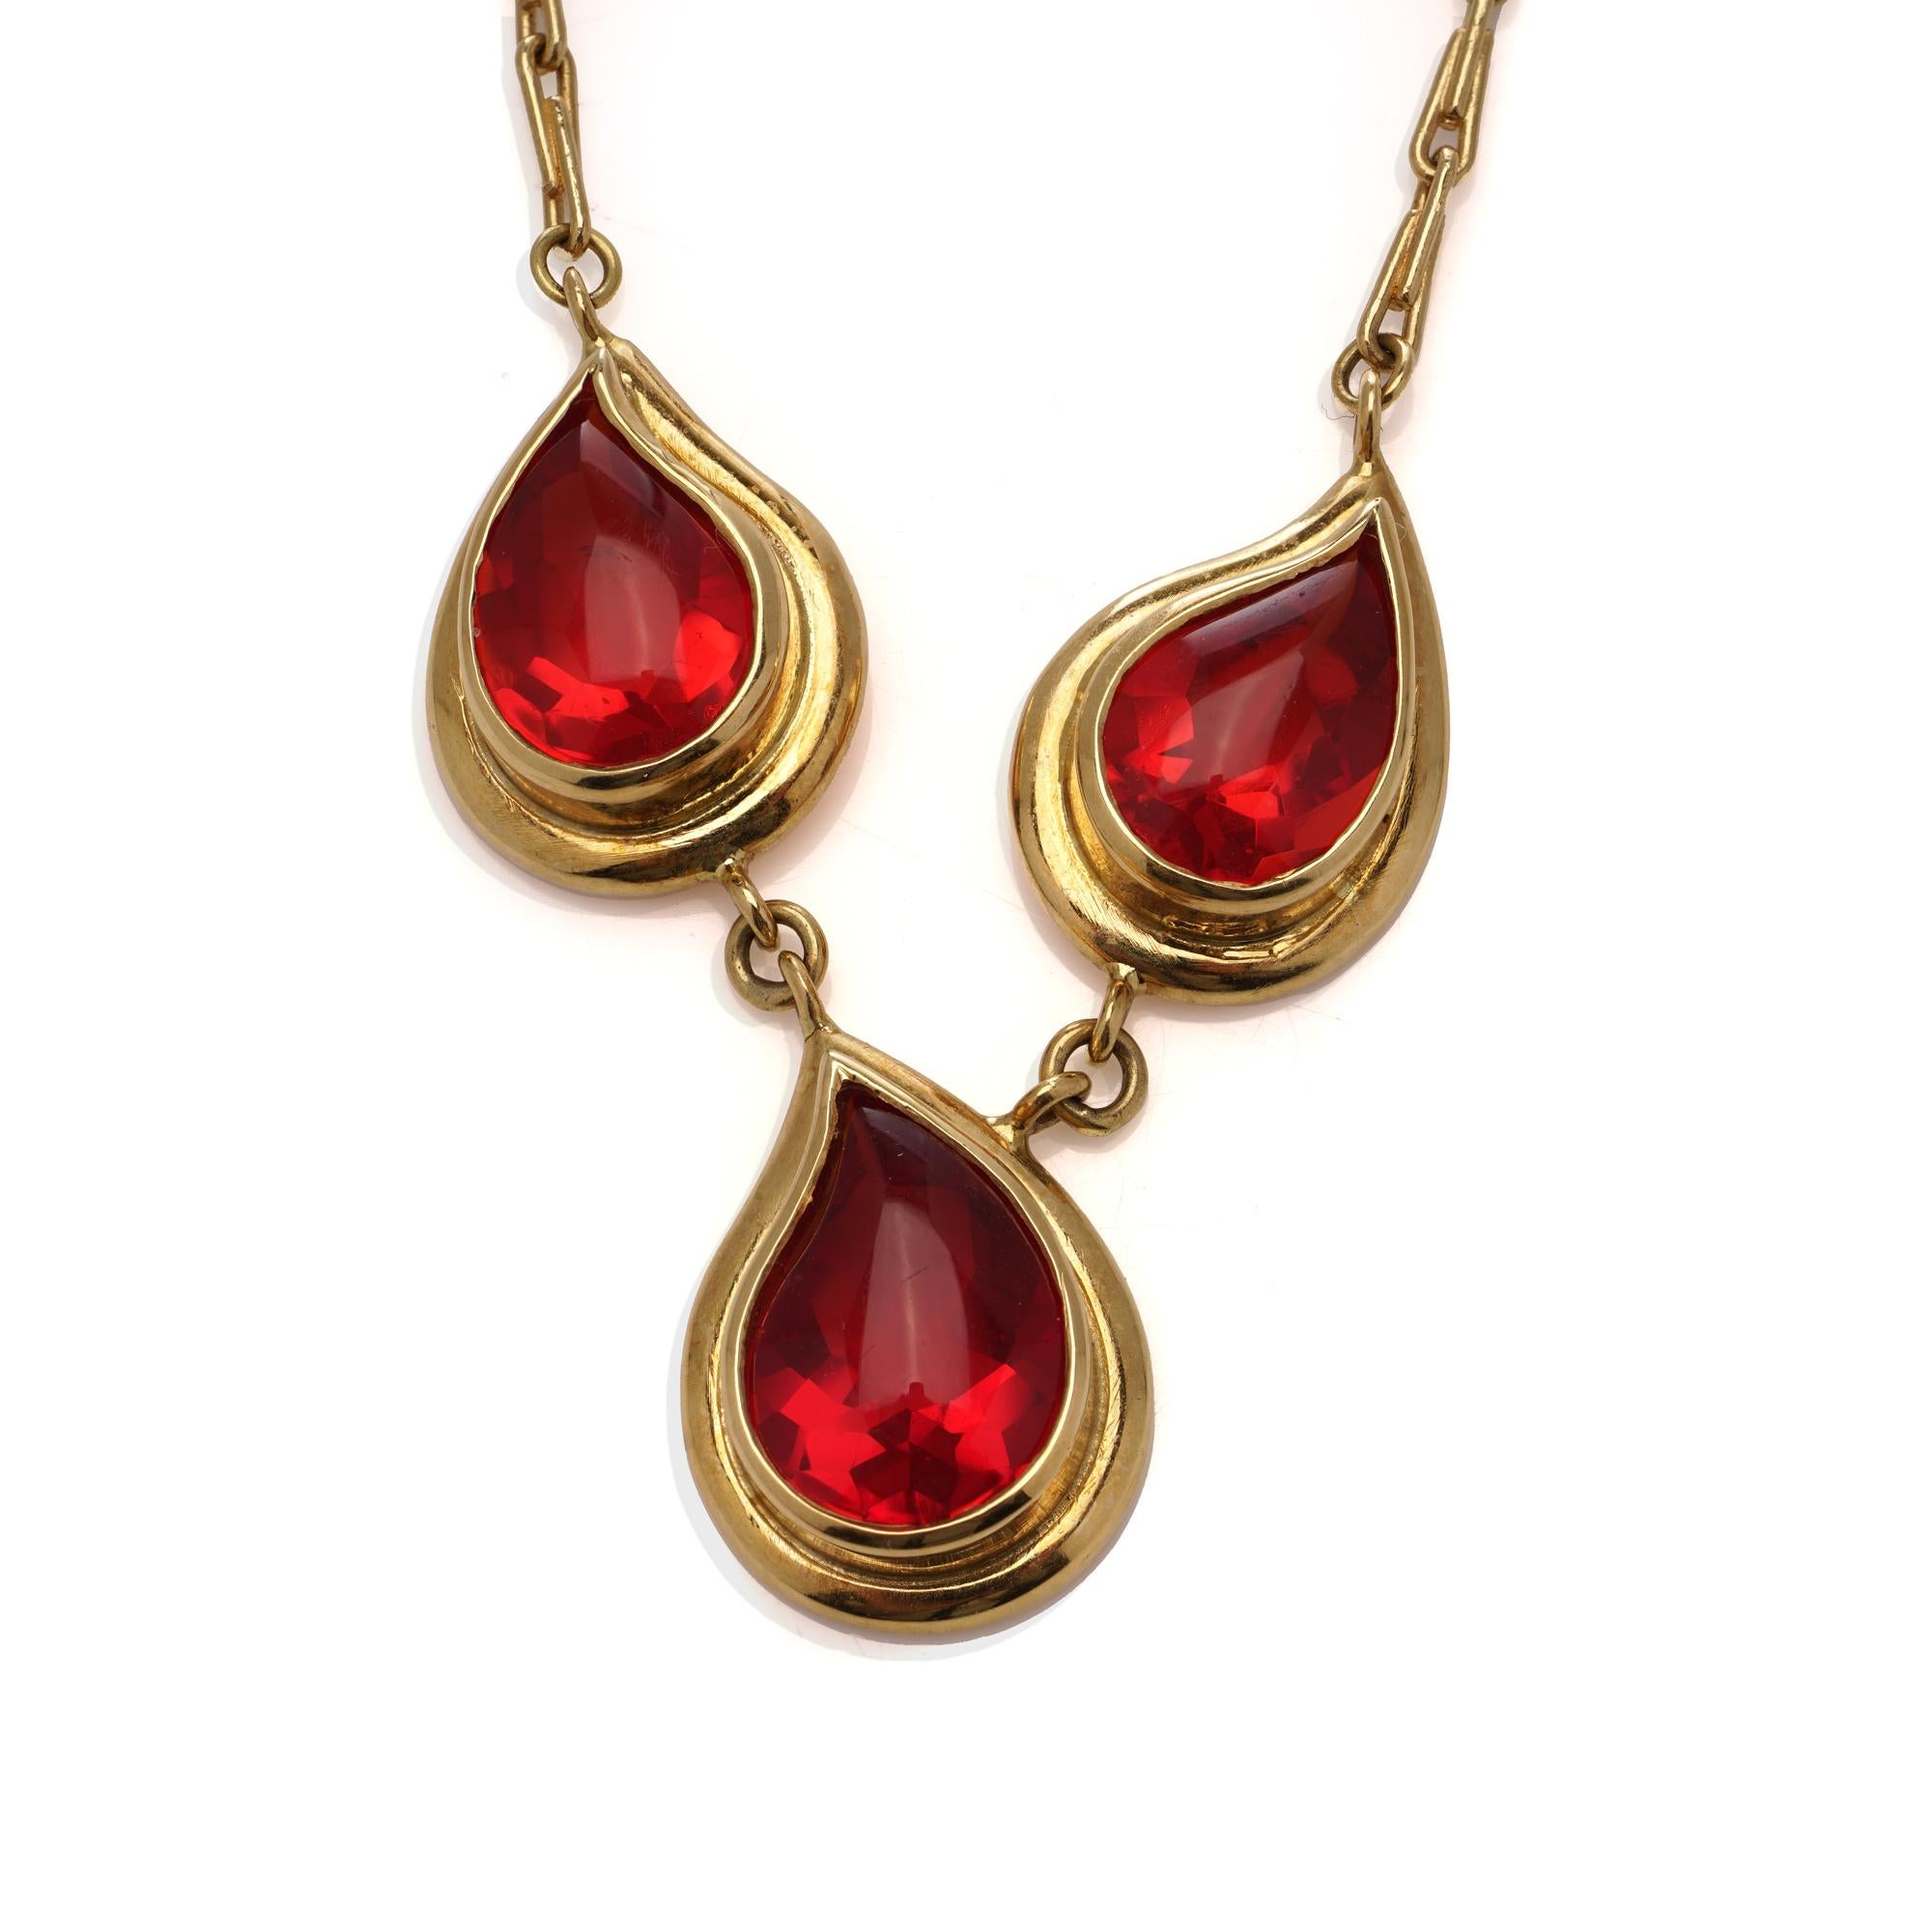 Cabochon 18kt gold pendant necklace featuring three tear-drop-shaped fire opals For Sale